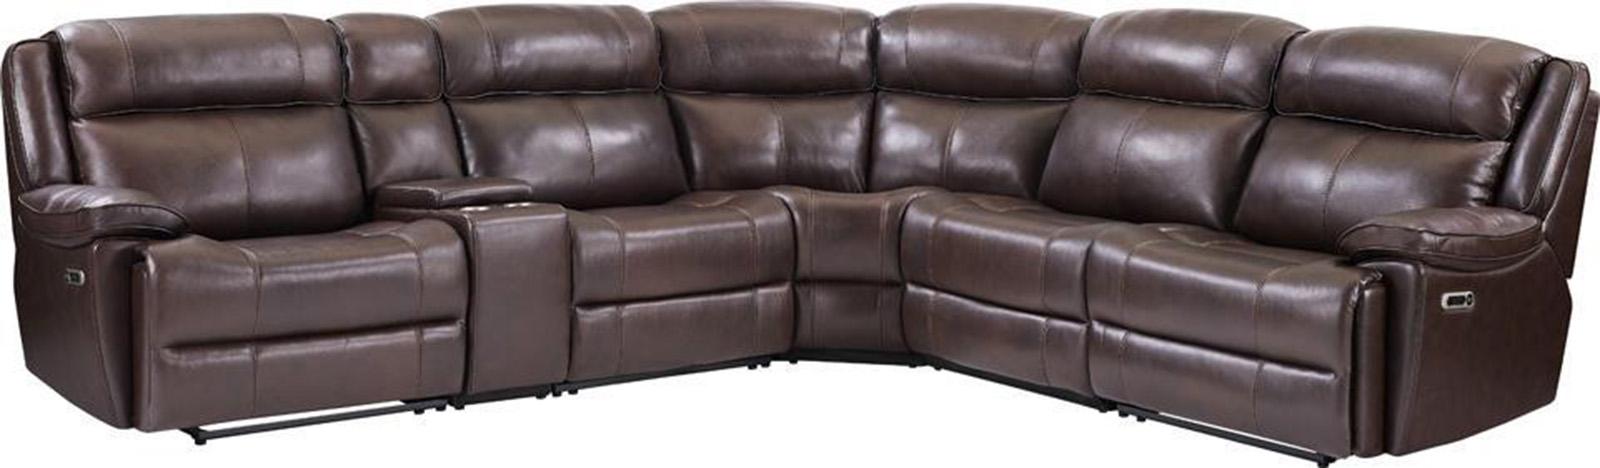 Parker House Furniture Eclipse Power Left Arm Facing Recliner in Florence Brown